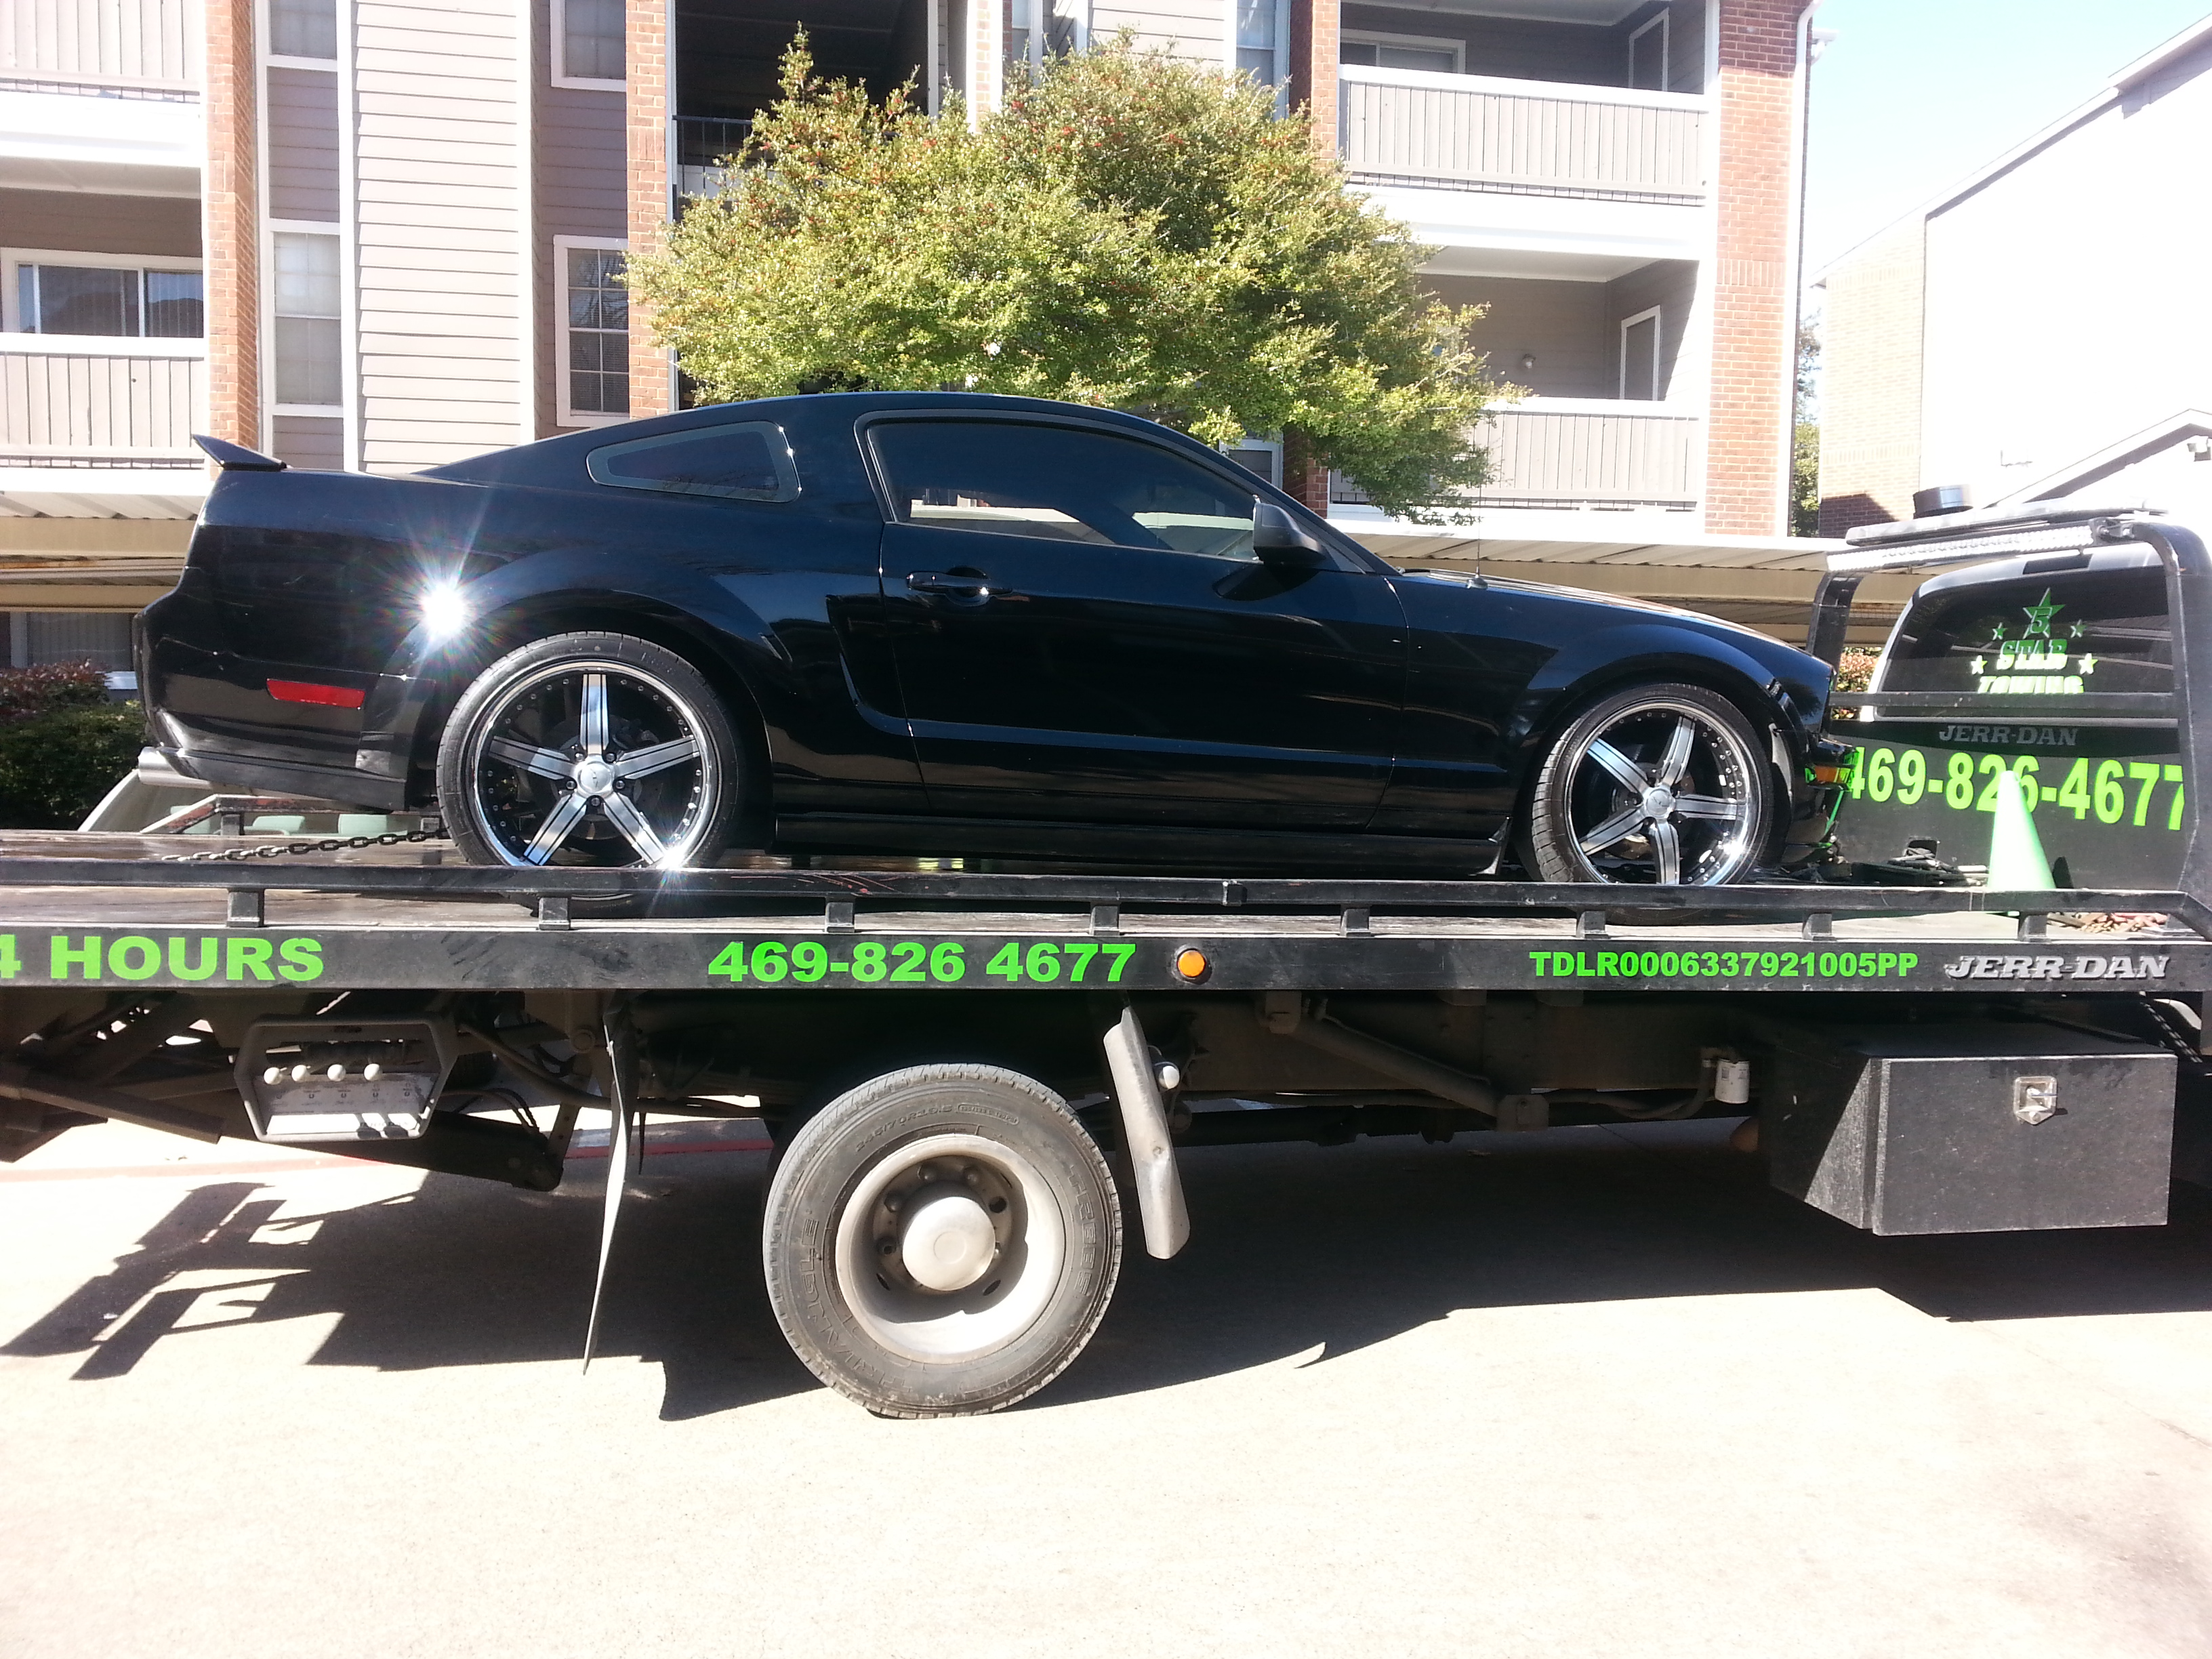 This is my car getting tow to lone star engine